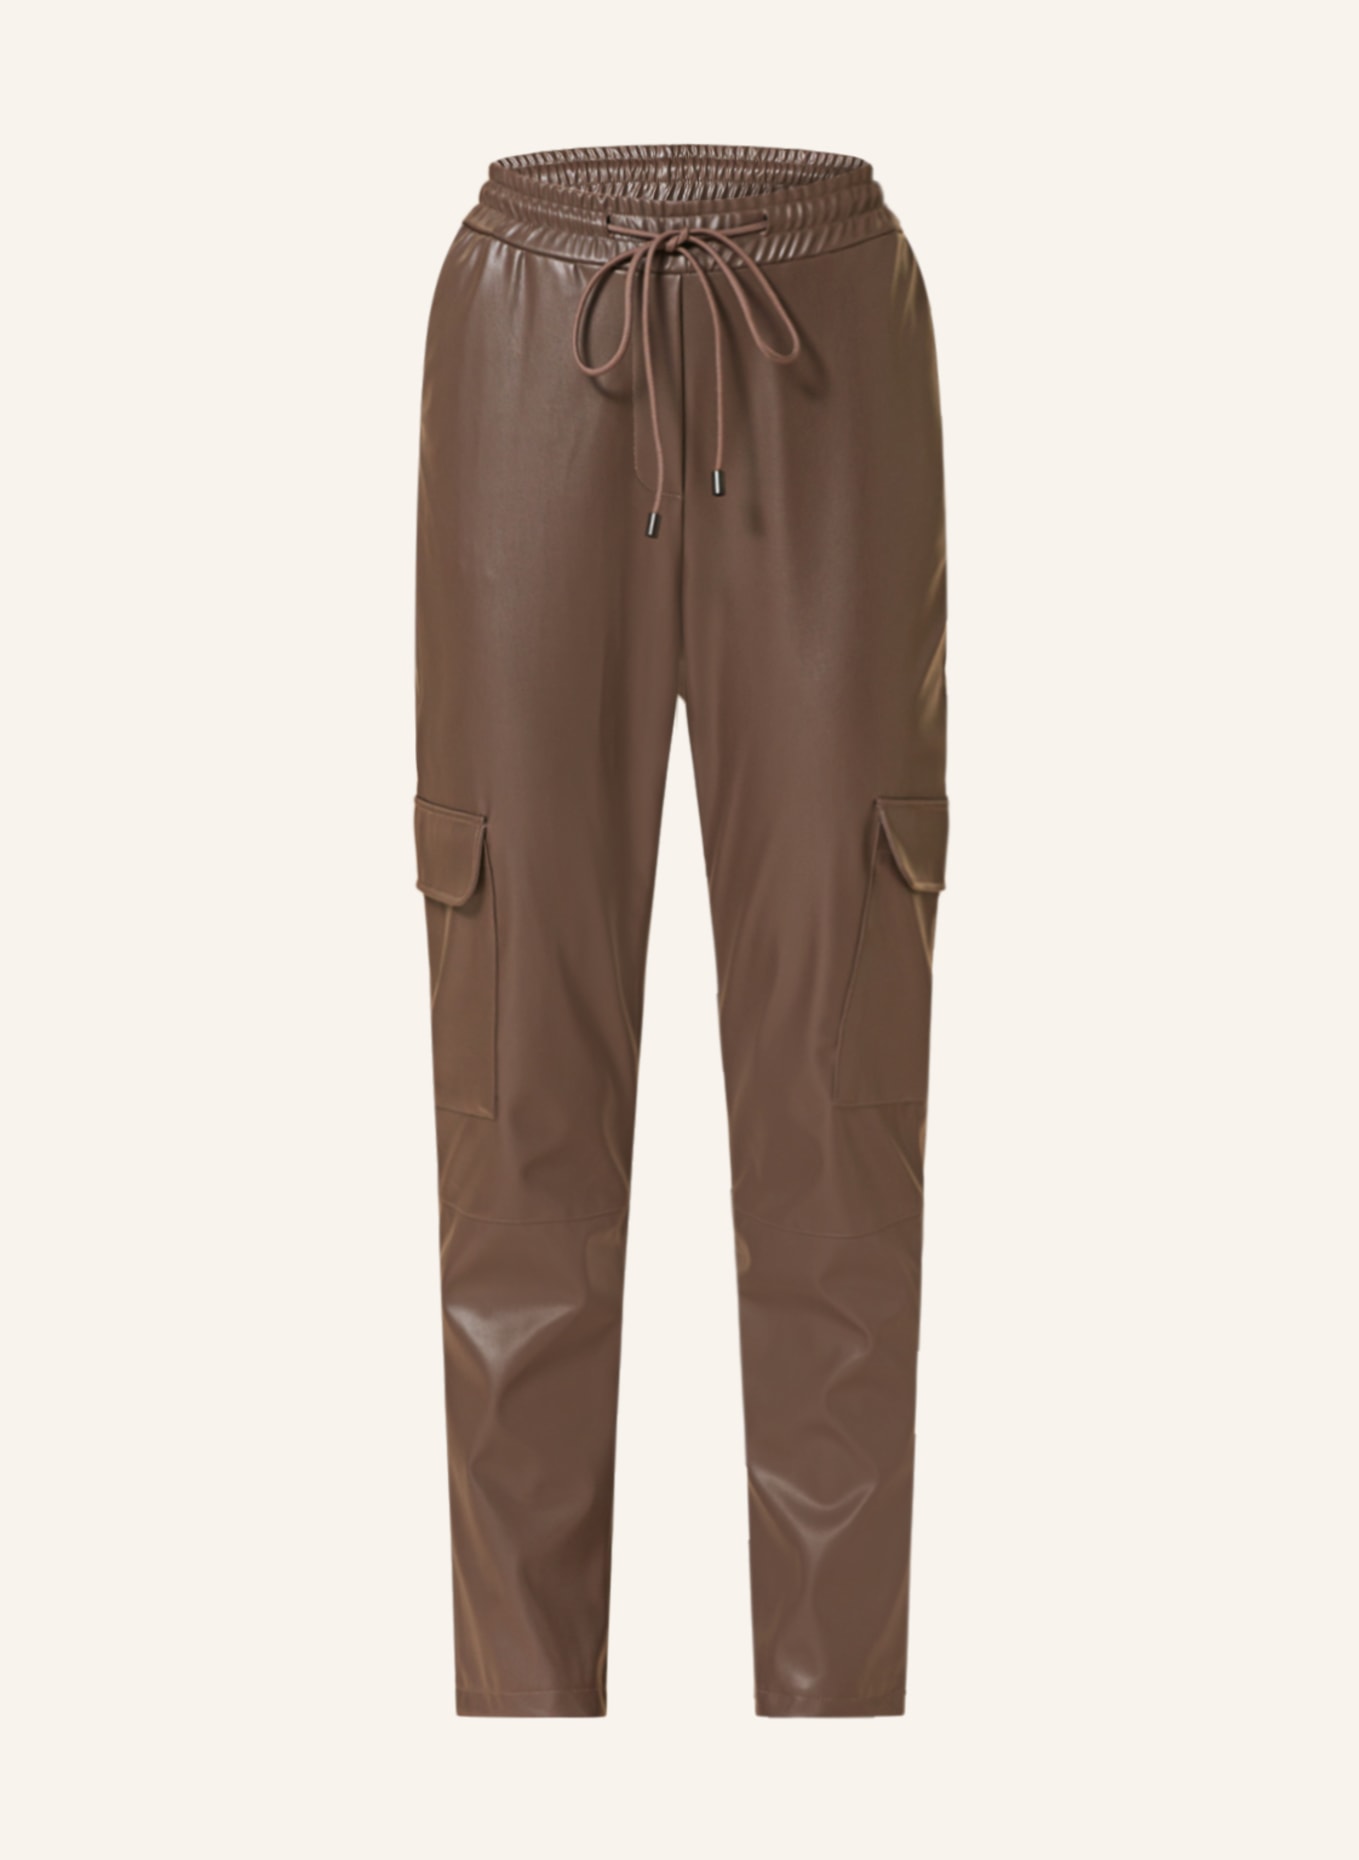 darling harbour Pants in jogger style in leather look, Color: BROWN (Image 1)